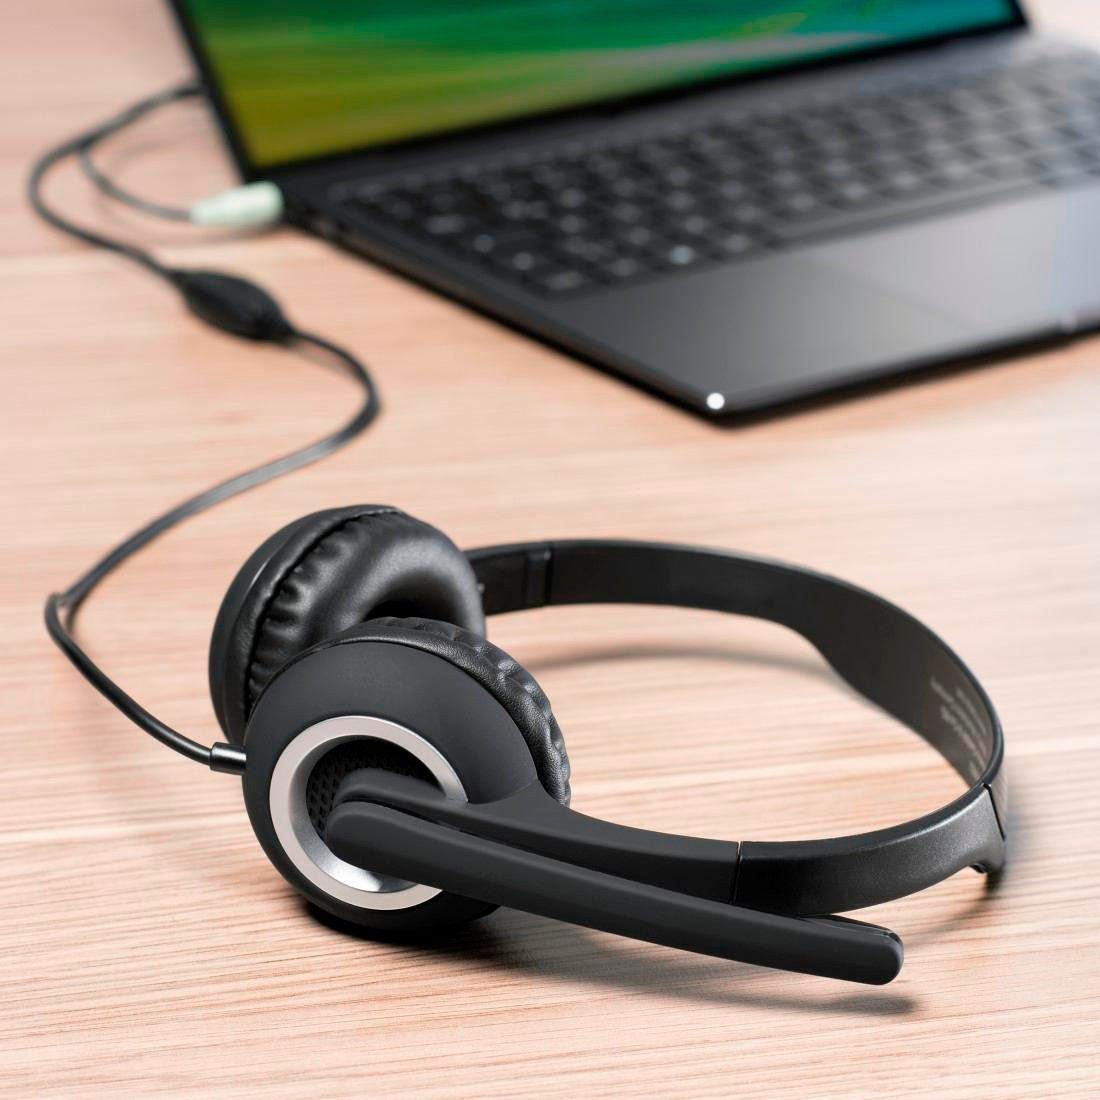 300" Hama Stereo "Essential HS Headset PC-Headset